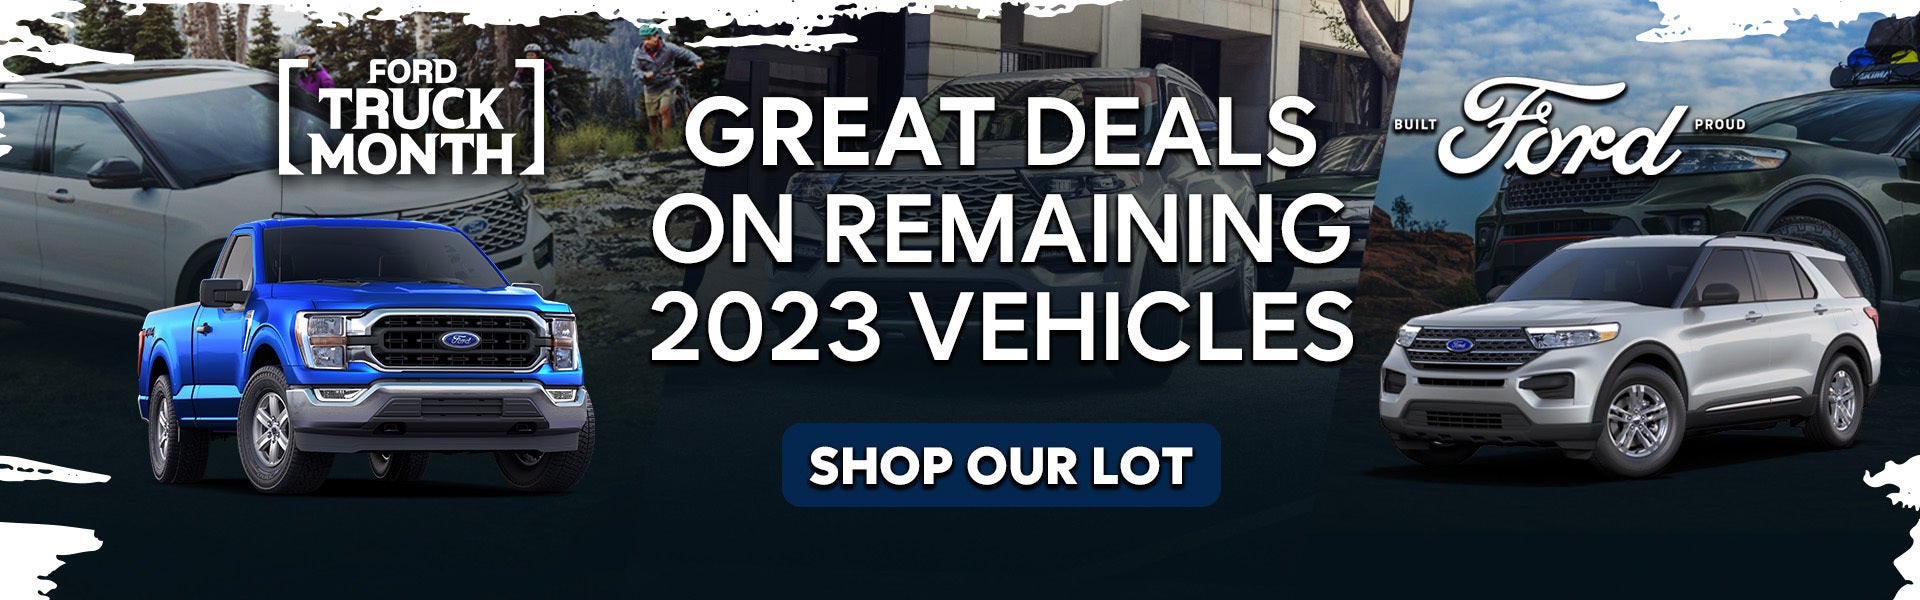 Great Deals On Remaining 2023 Vehicles Special Offer